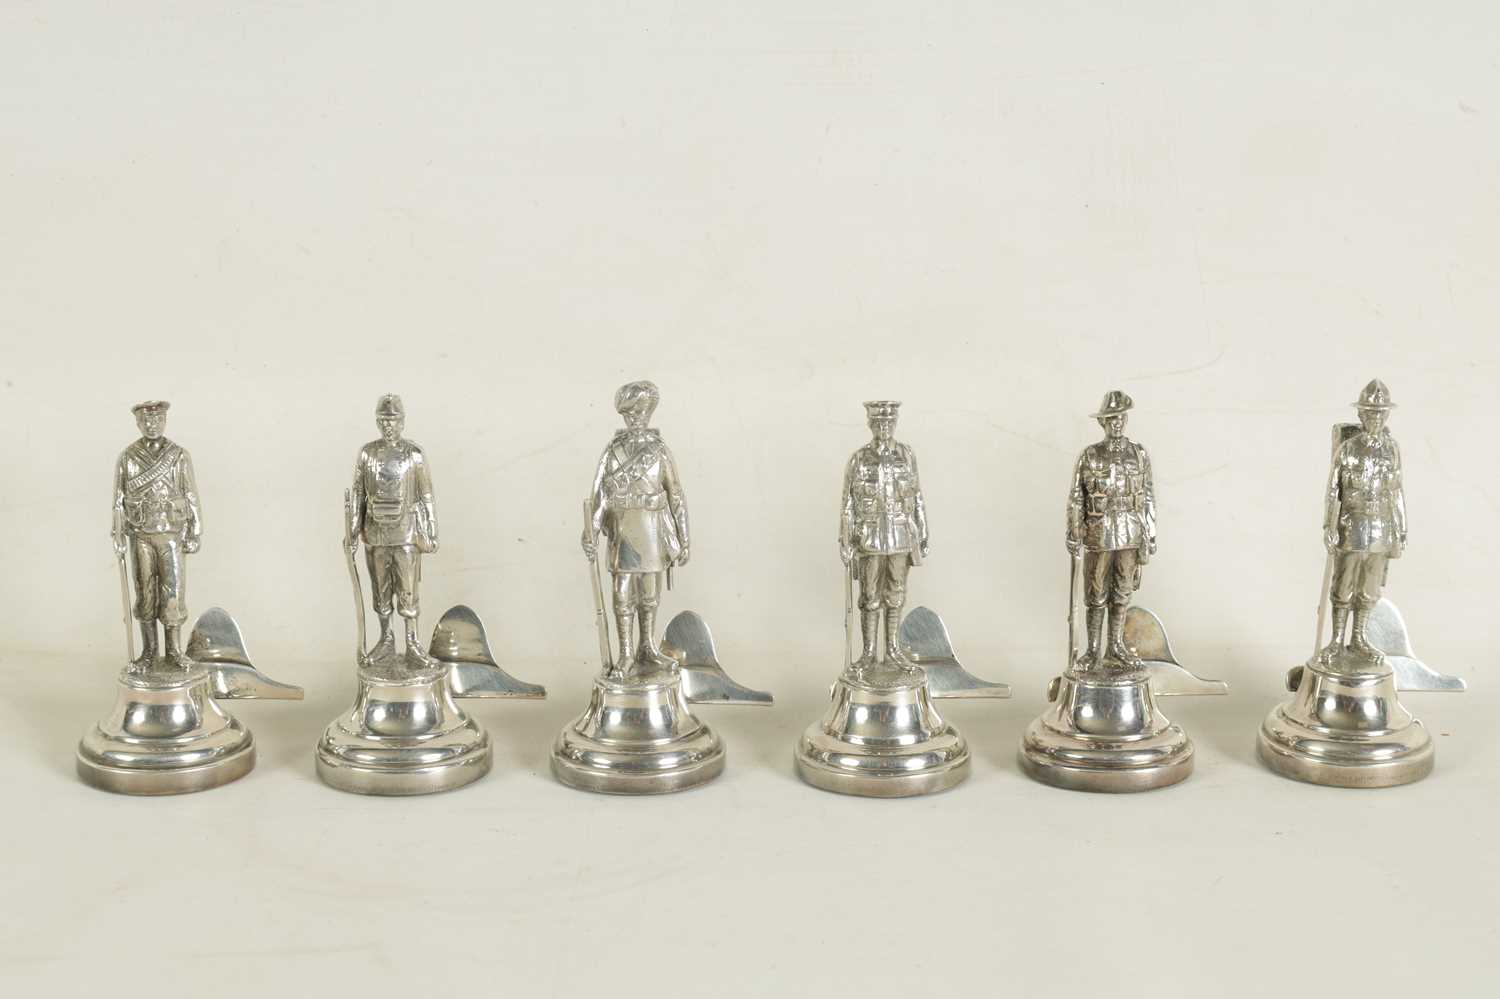 A LARGE AND RARE CASED COMPLETE SET OF SIX SILVER 'SOLDIERS OF THE EMPIRE' FIGURAL MENU HOLDERS - Image 4 of 12